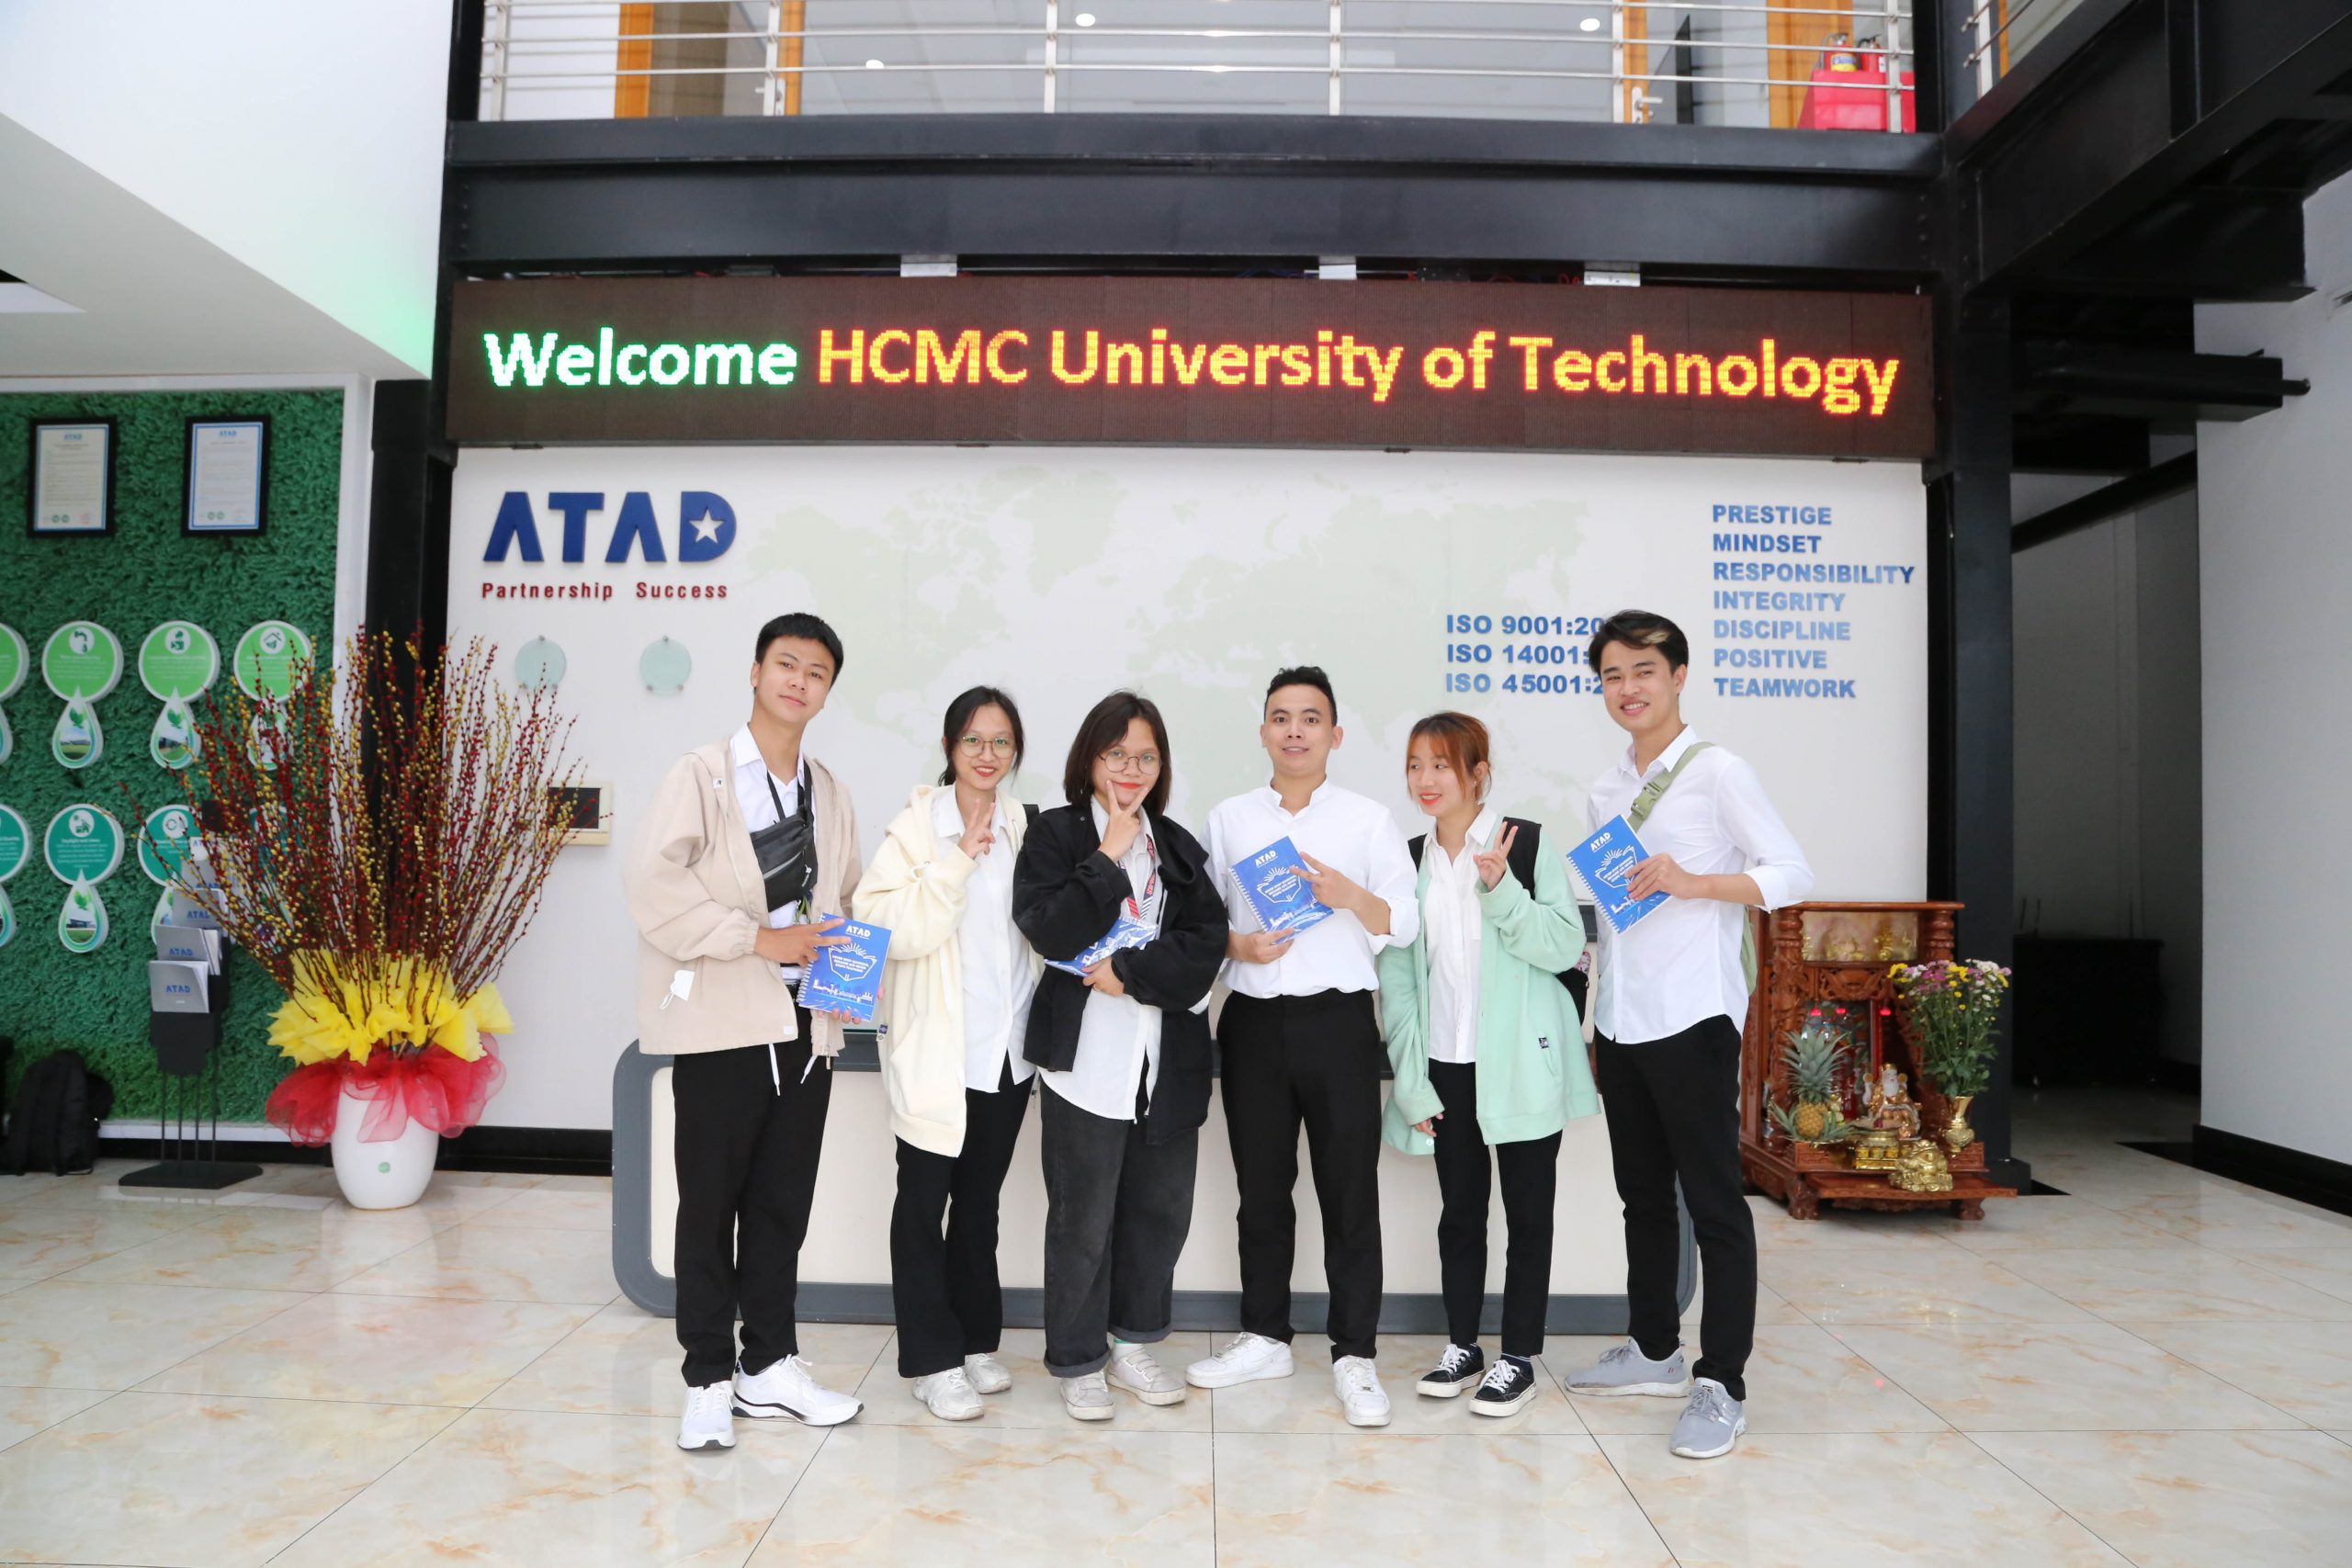 Factory tour to ATAD Dong Nai for Ho Chi Minh City University of Technology students